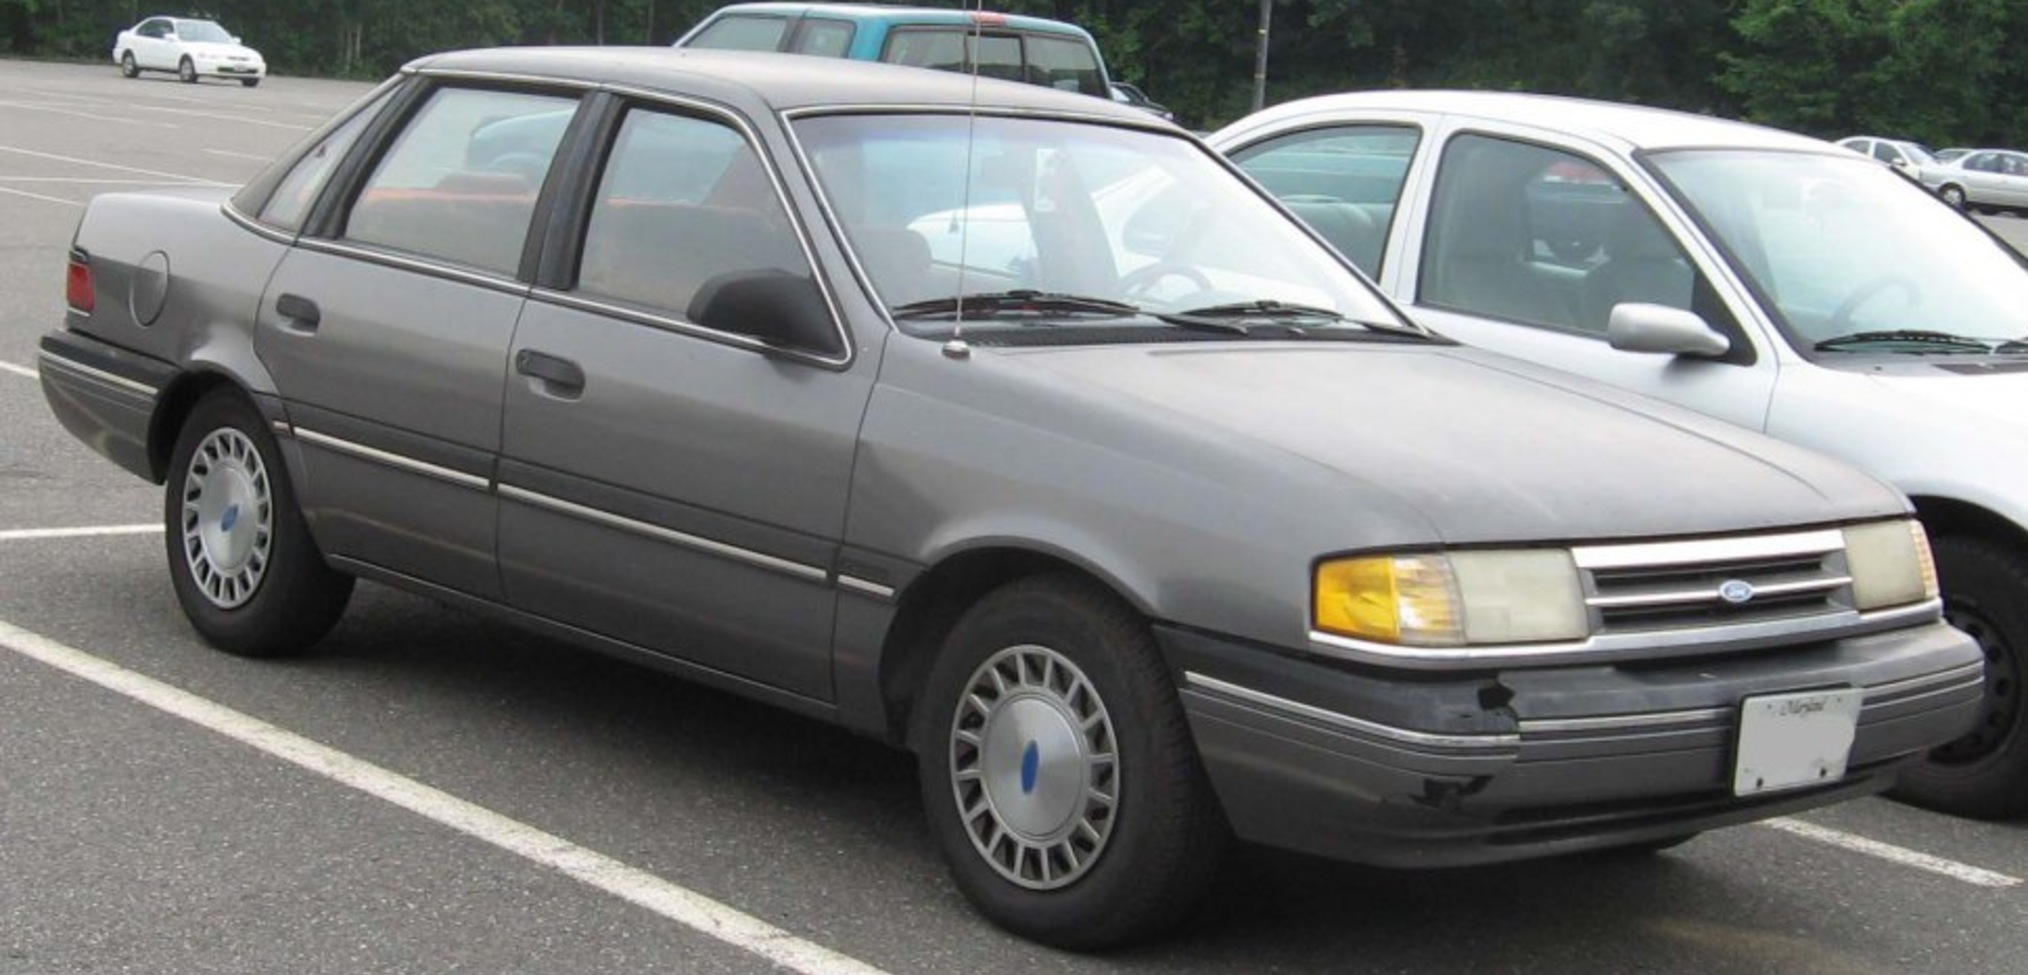 Ford Tempo 2.3 (102 Hp) 1987, 1988, 1989, 1990, 1991, 1992, 1993, 1994, 1995